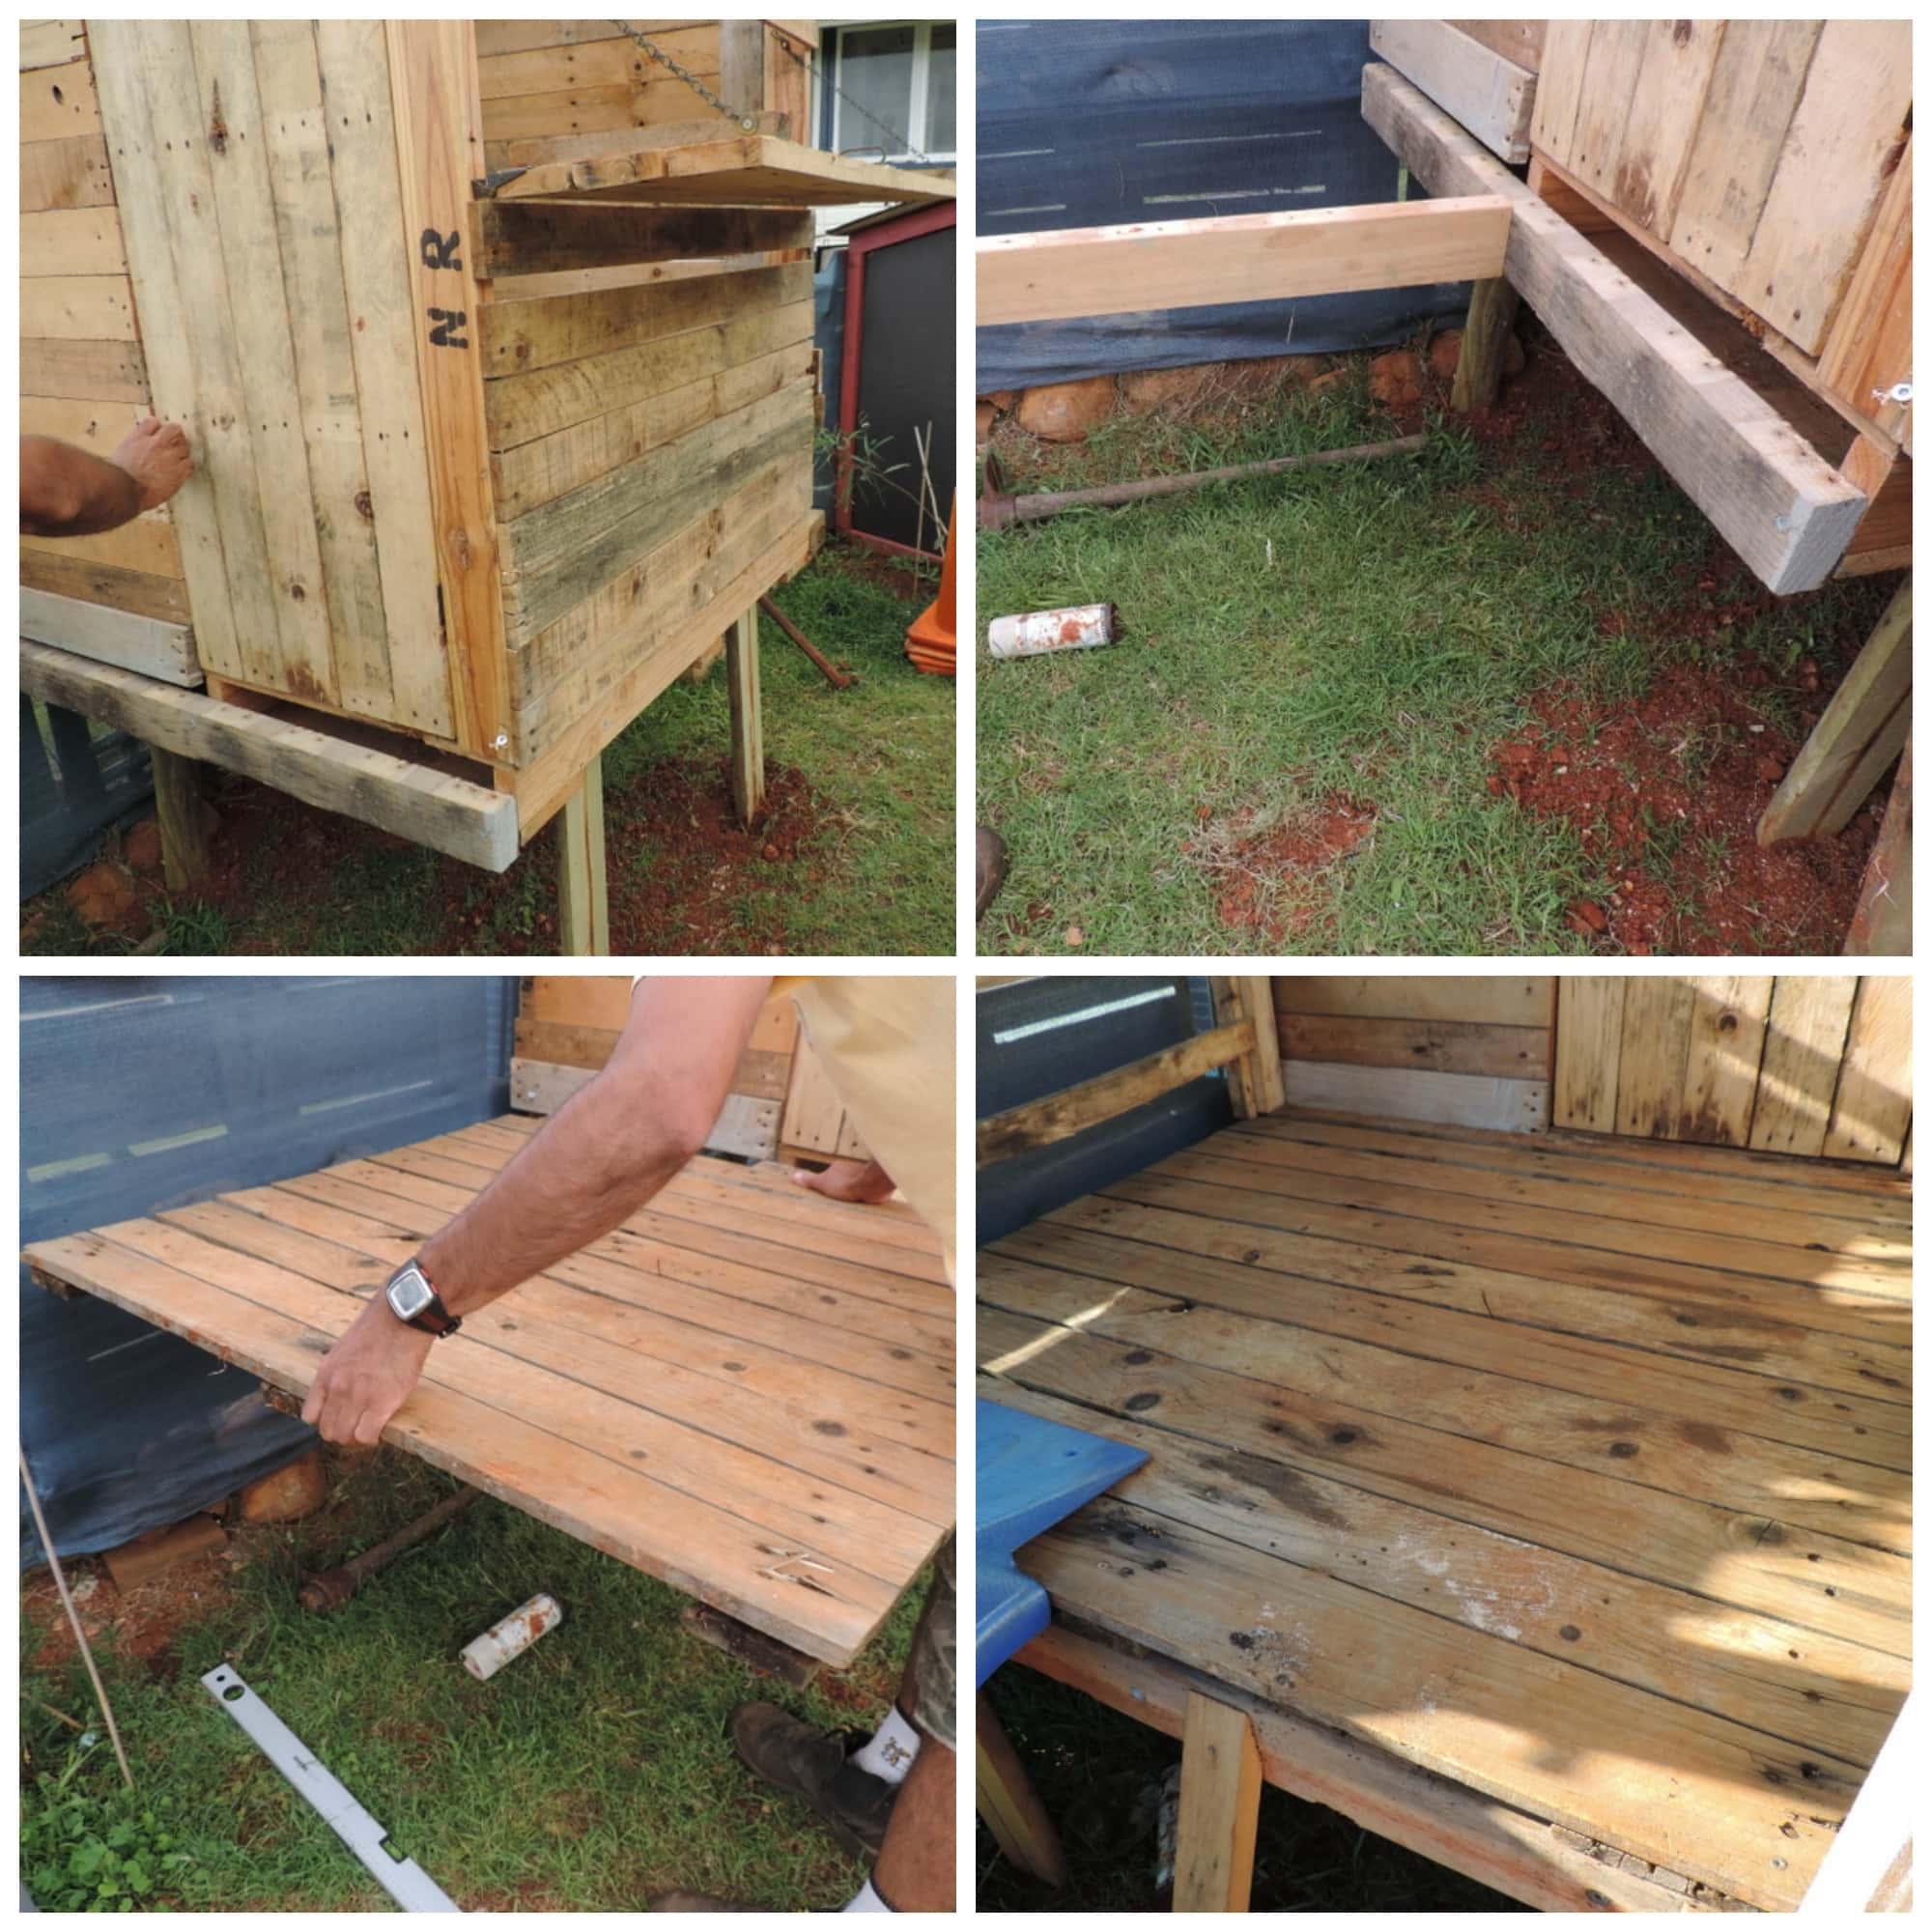 A recycled pallet cubby for outside play in the backyard. A project that cost very little due to the recycled materials used throughout - See how they did it in this post from Mummy Musings and Mayhem